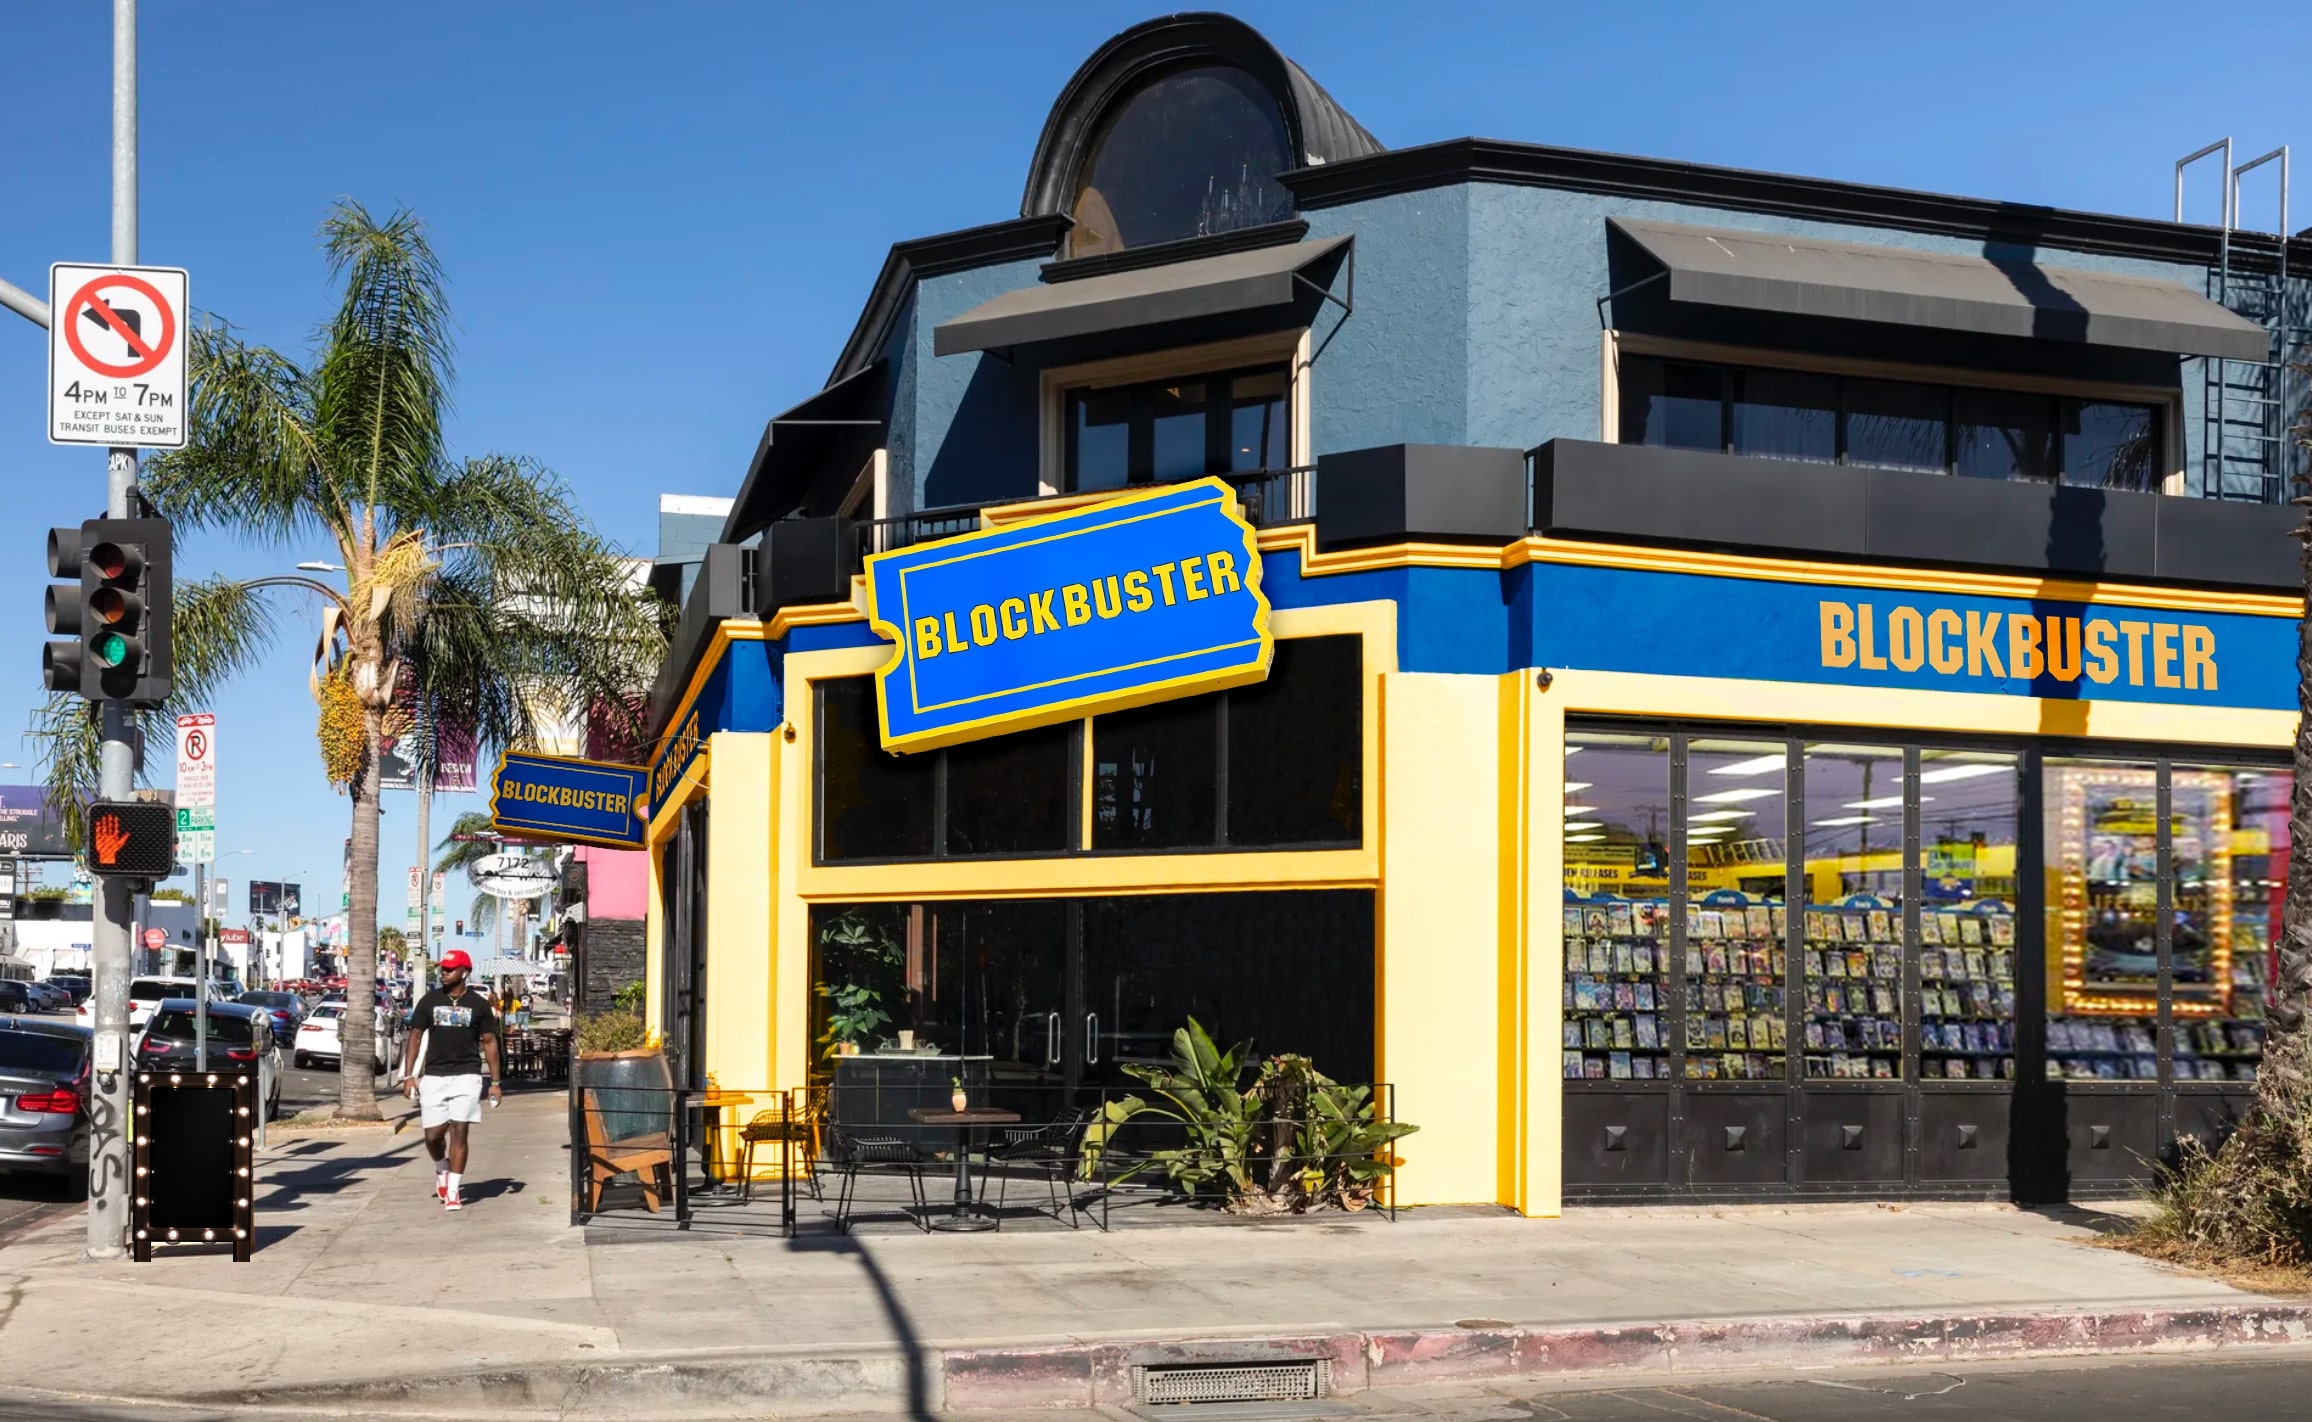 A Blockbuster-themed pop-up bar in Los Angeles, California.